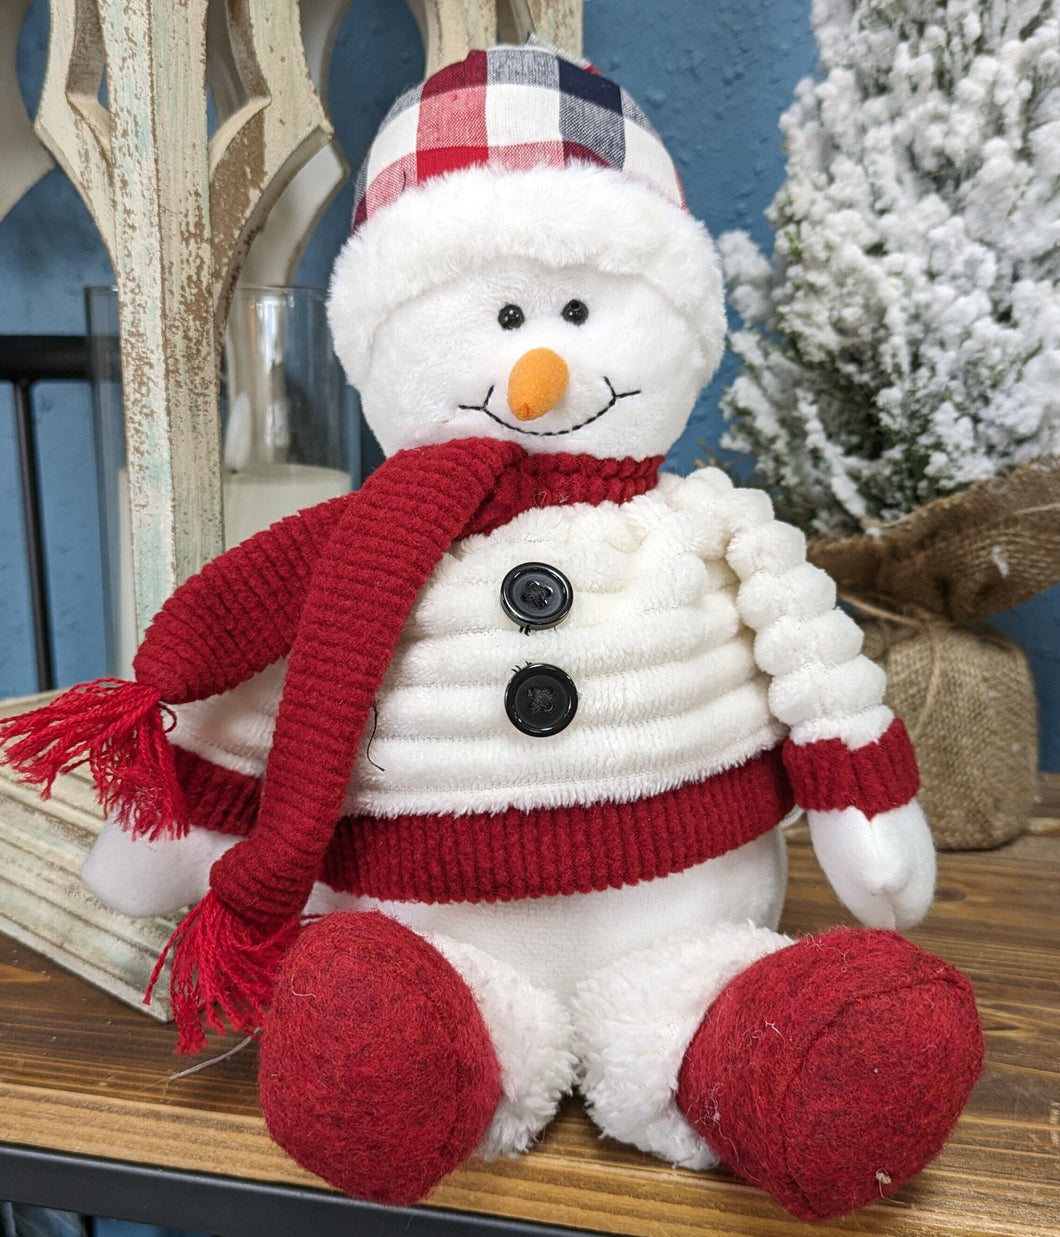 Plush Snowman wearing a Plaid Hat, Furry Coat and Scarf | Christmas Holiday Decorations